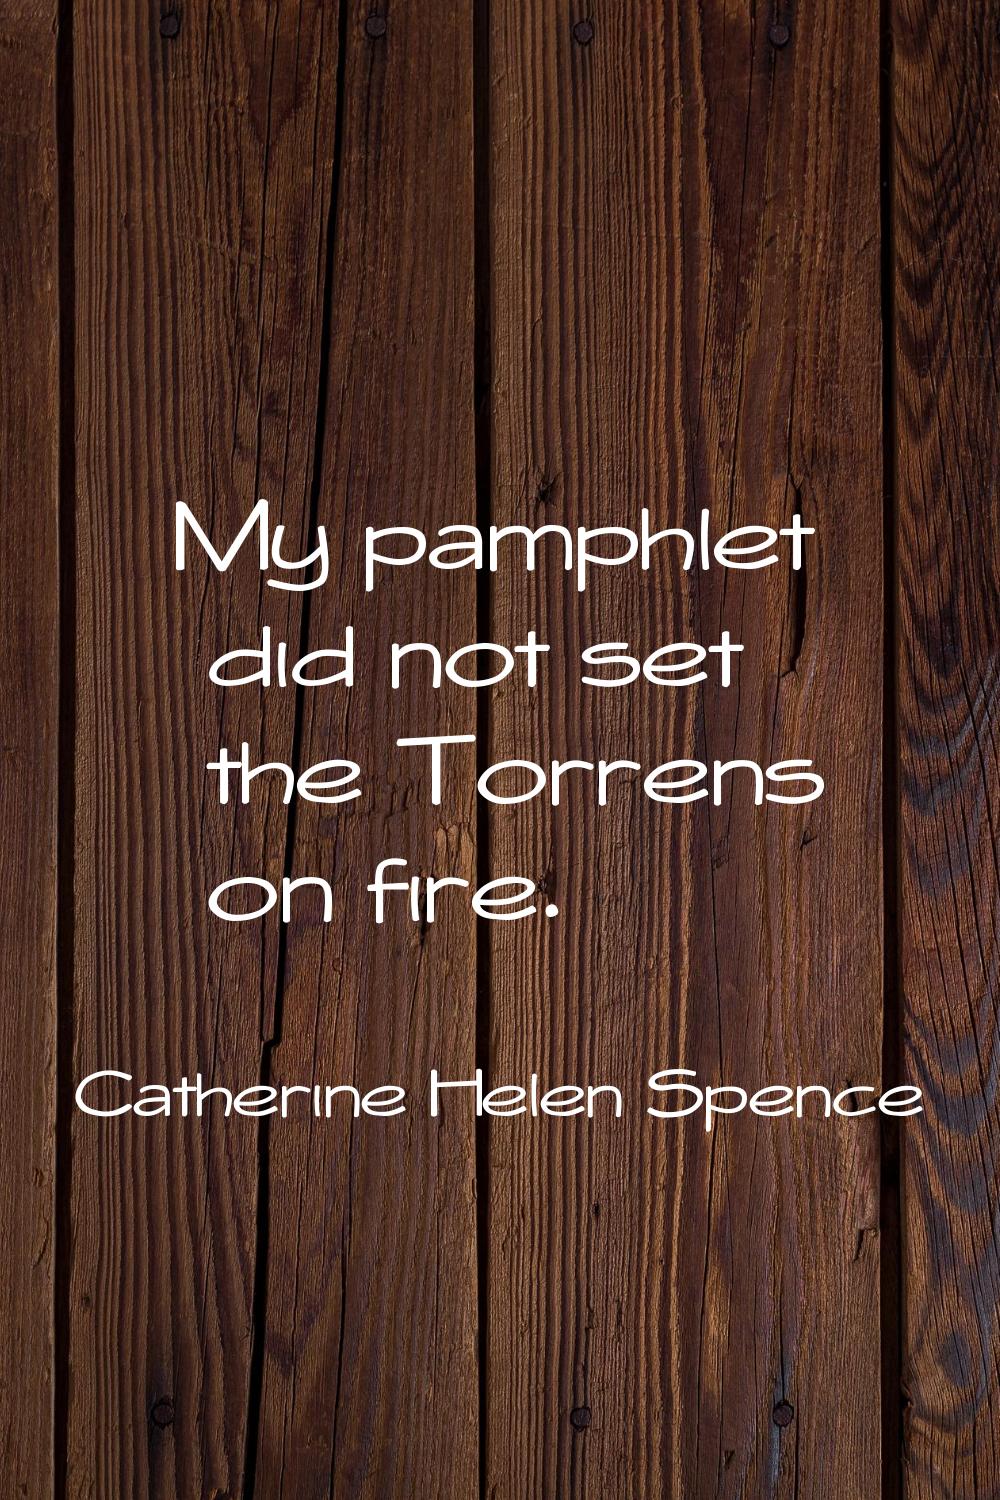 My pamphlet did not set the Torrens on fire.